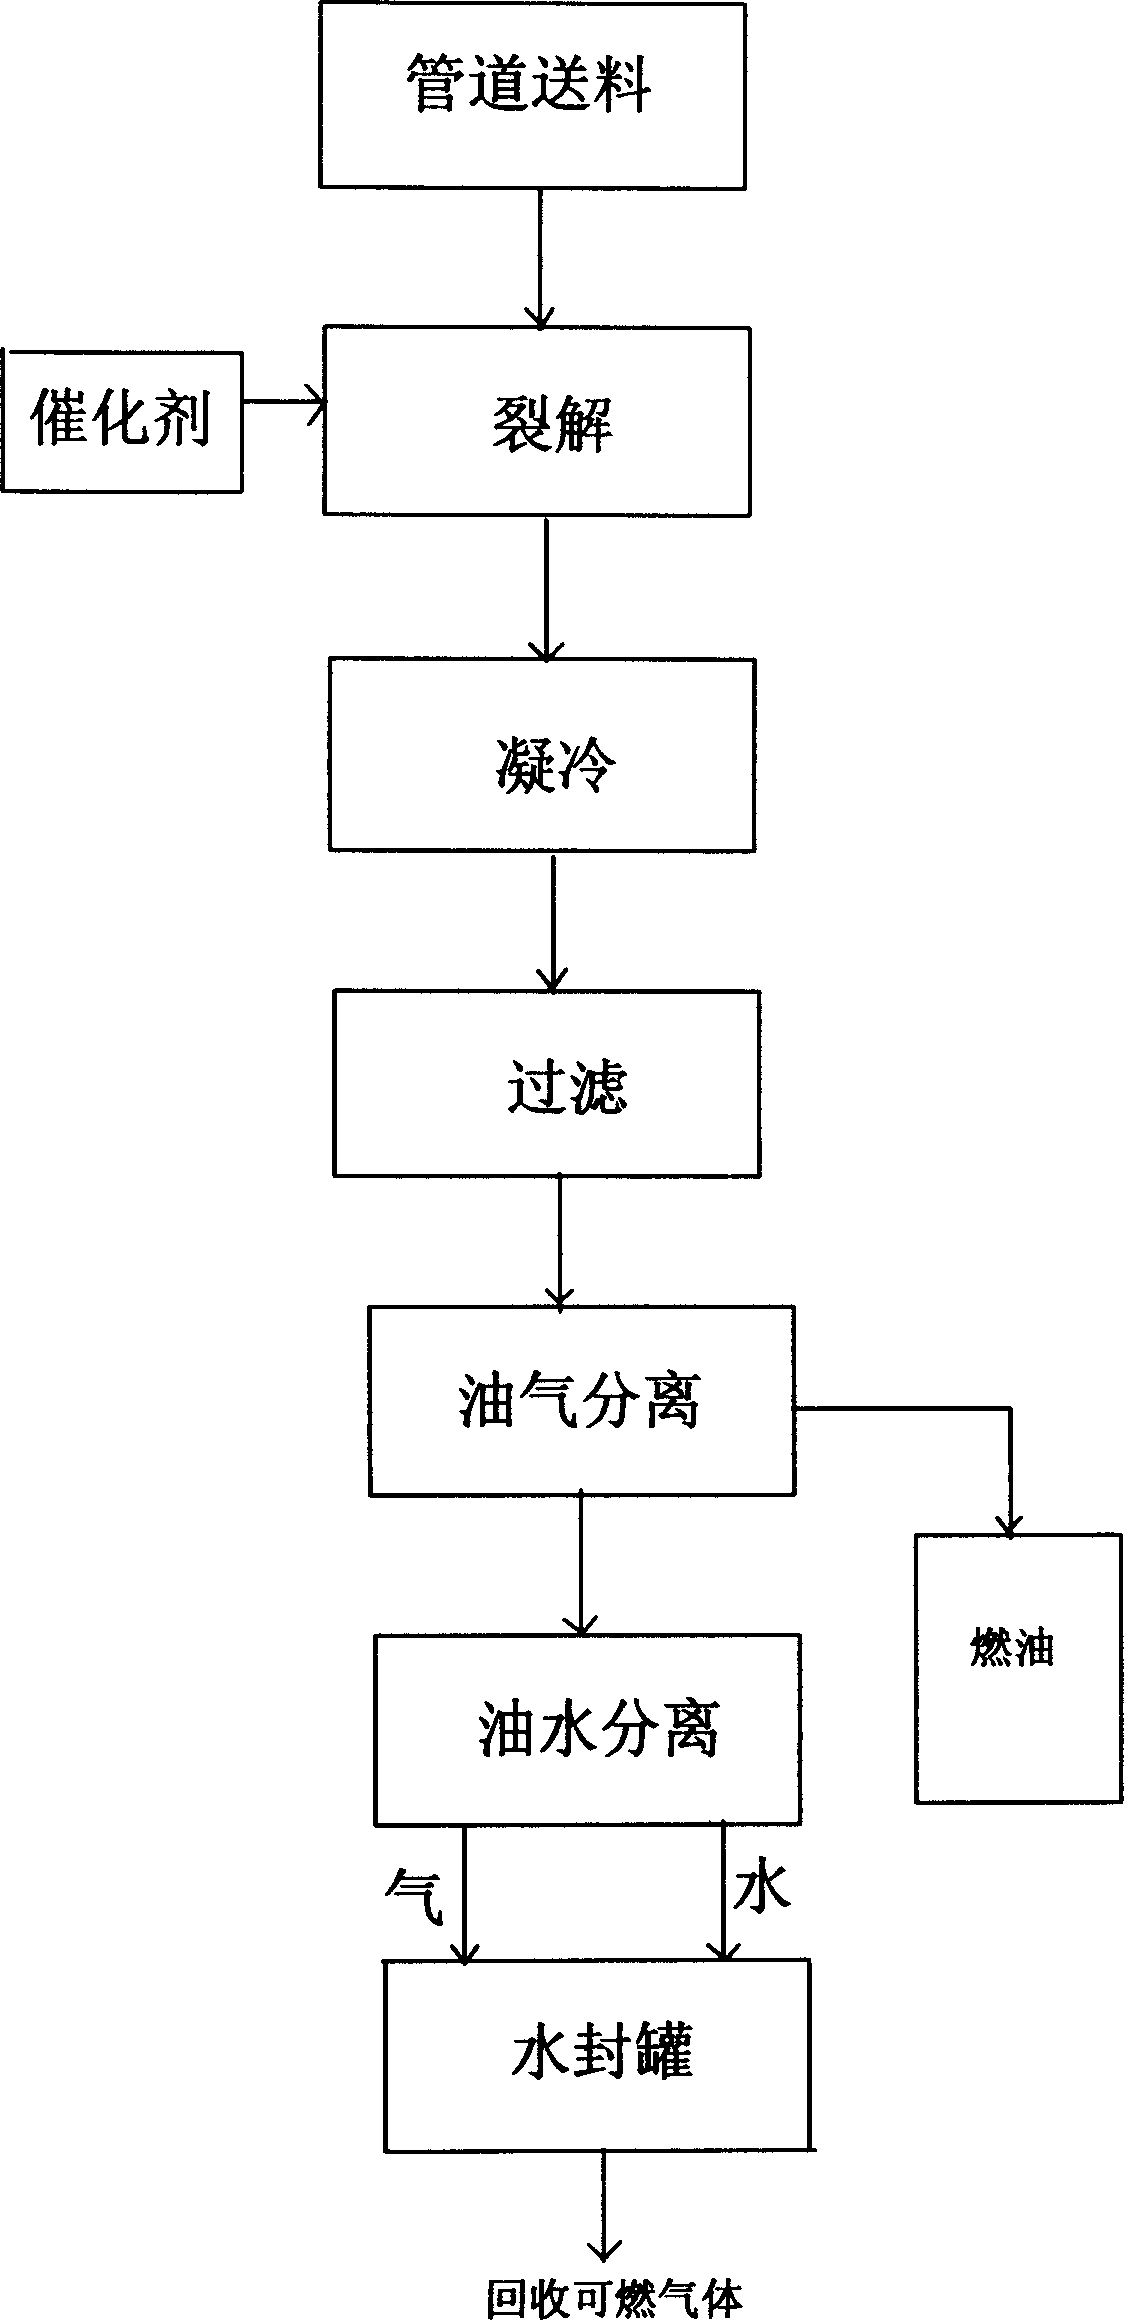 Waste plastic and rubber reduction and reducing system